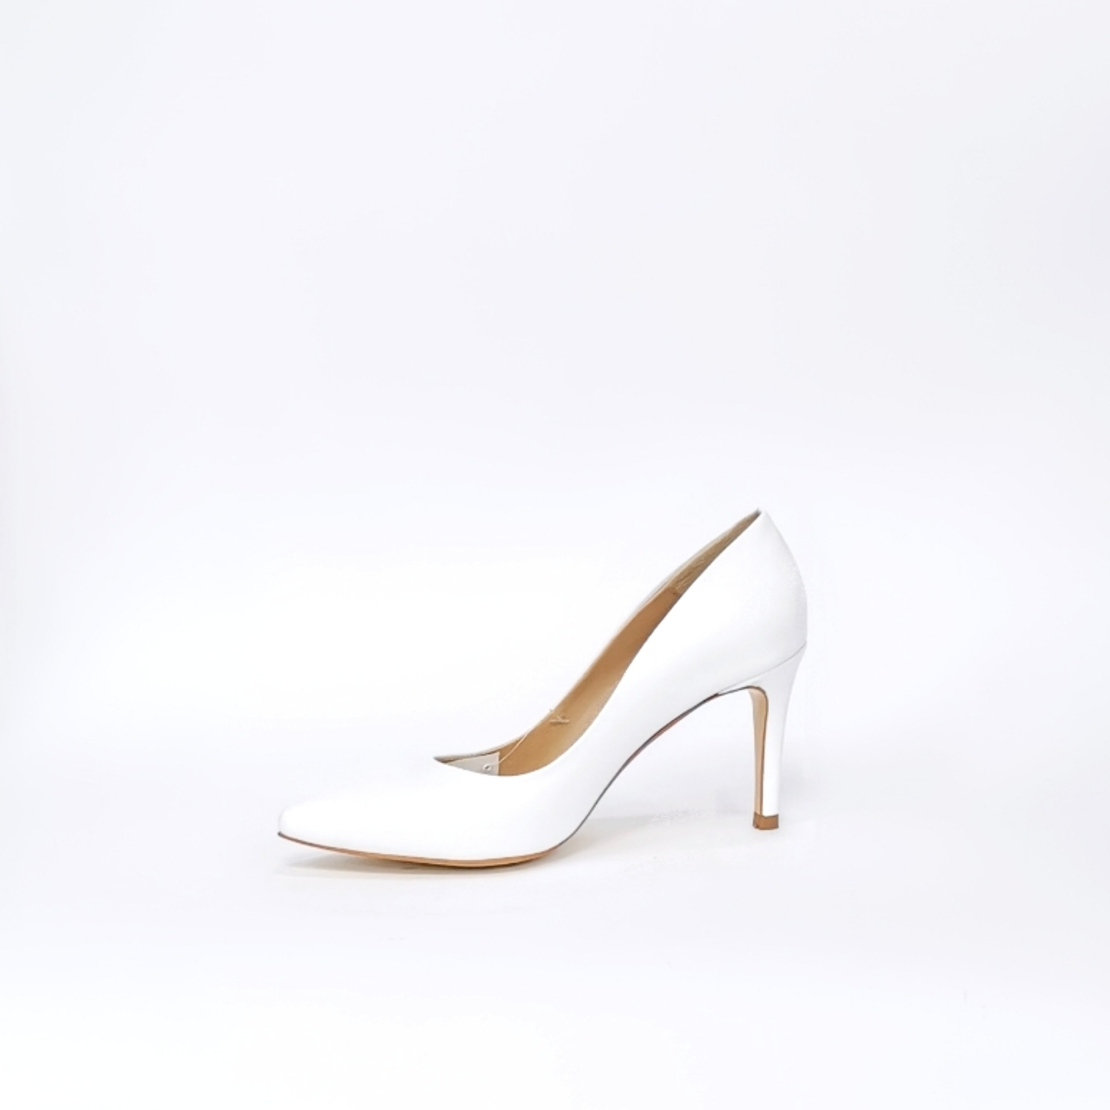 Women's elegant shoes made of natural leather in white/79010